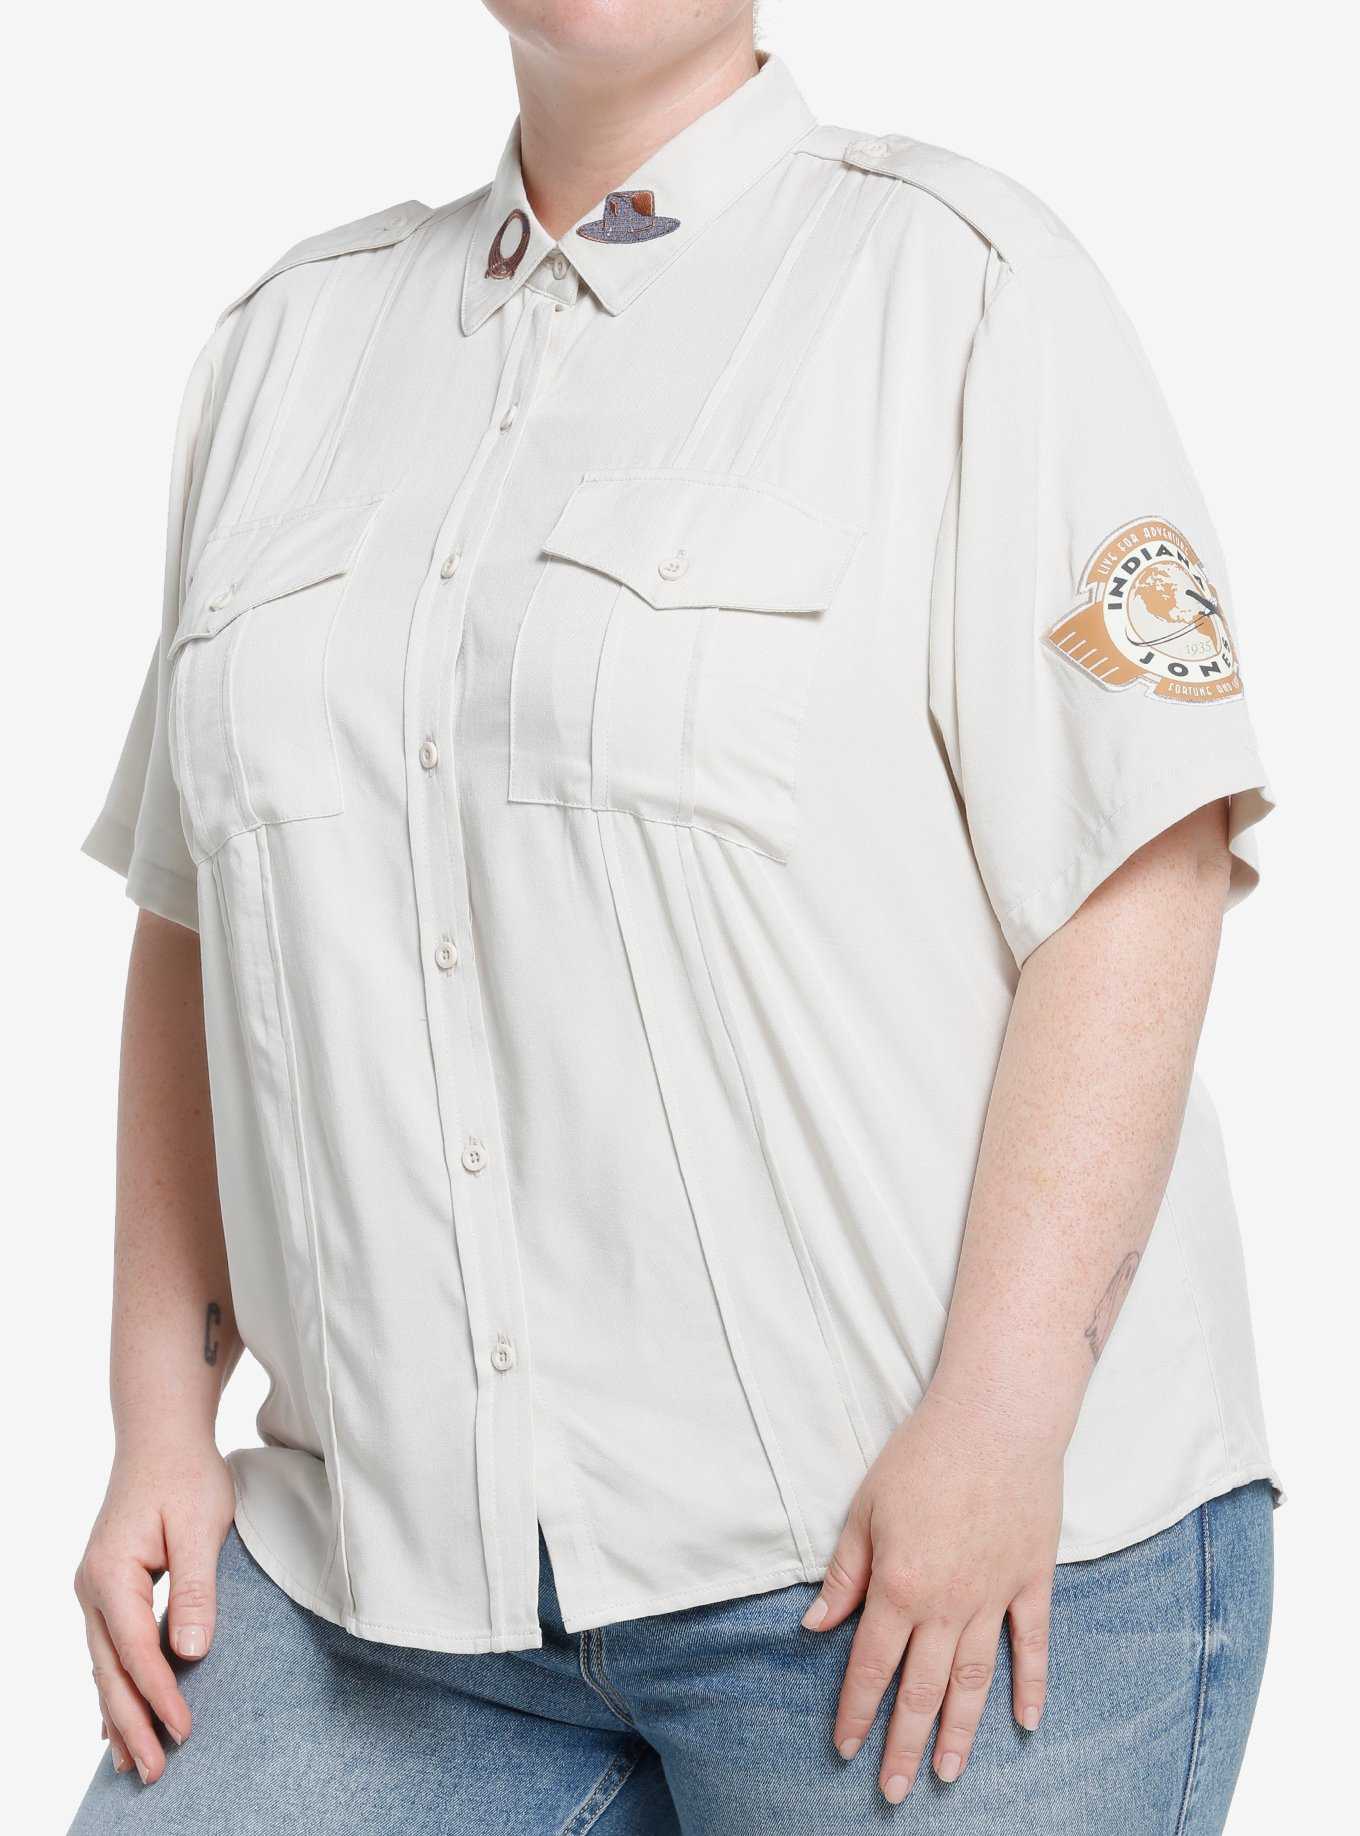 Her Universe Indiana Jones Expedition Girls Woven Button-Up Plus Size, , hi-res